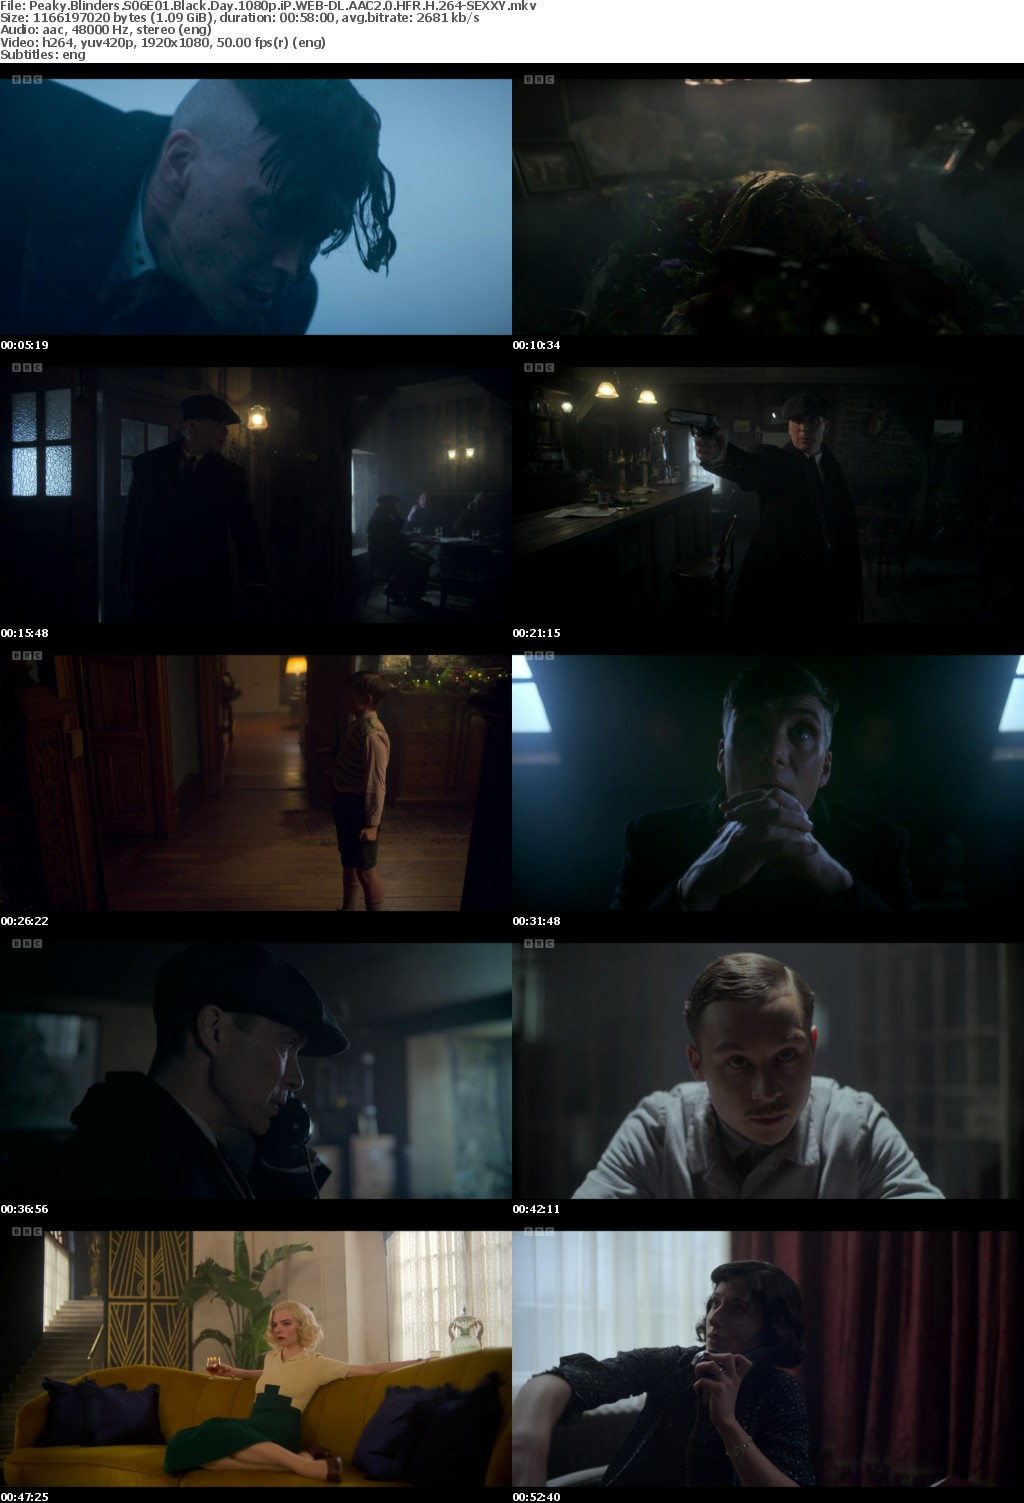 Peaky Blinders S06E01 Black Day 1080p iP WEB-DL AAC2 0 HFR H 264-SEXXY